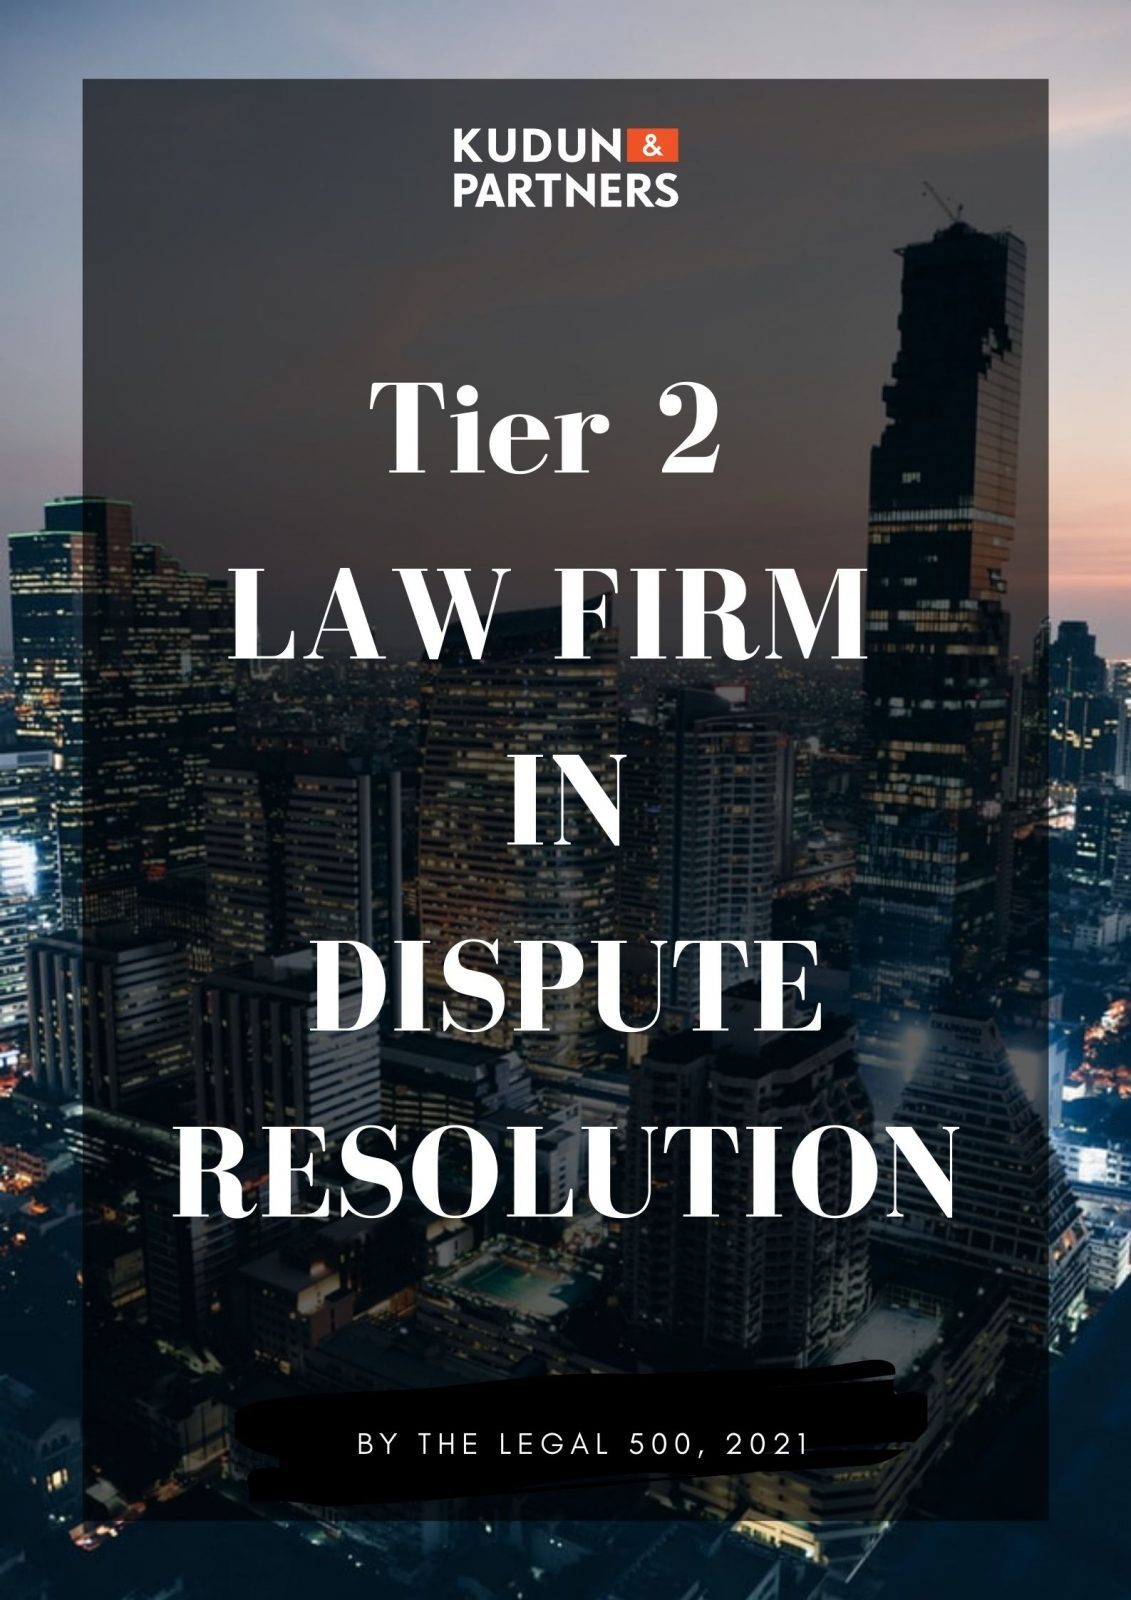 Kudun and Partners Ranked as a Tier 2 in Dispute Resolution by THE LEGAL 500, 2021